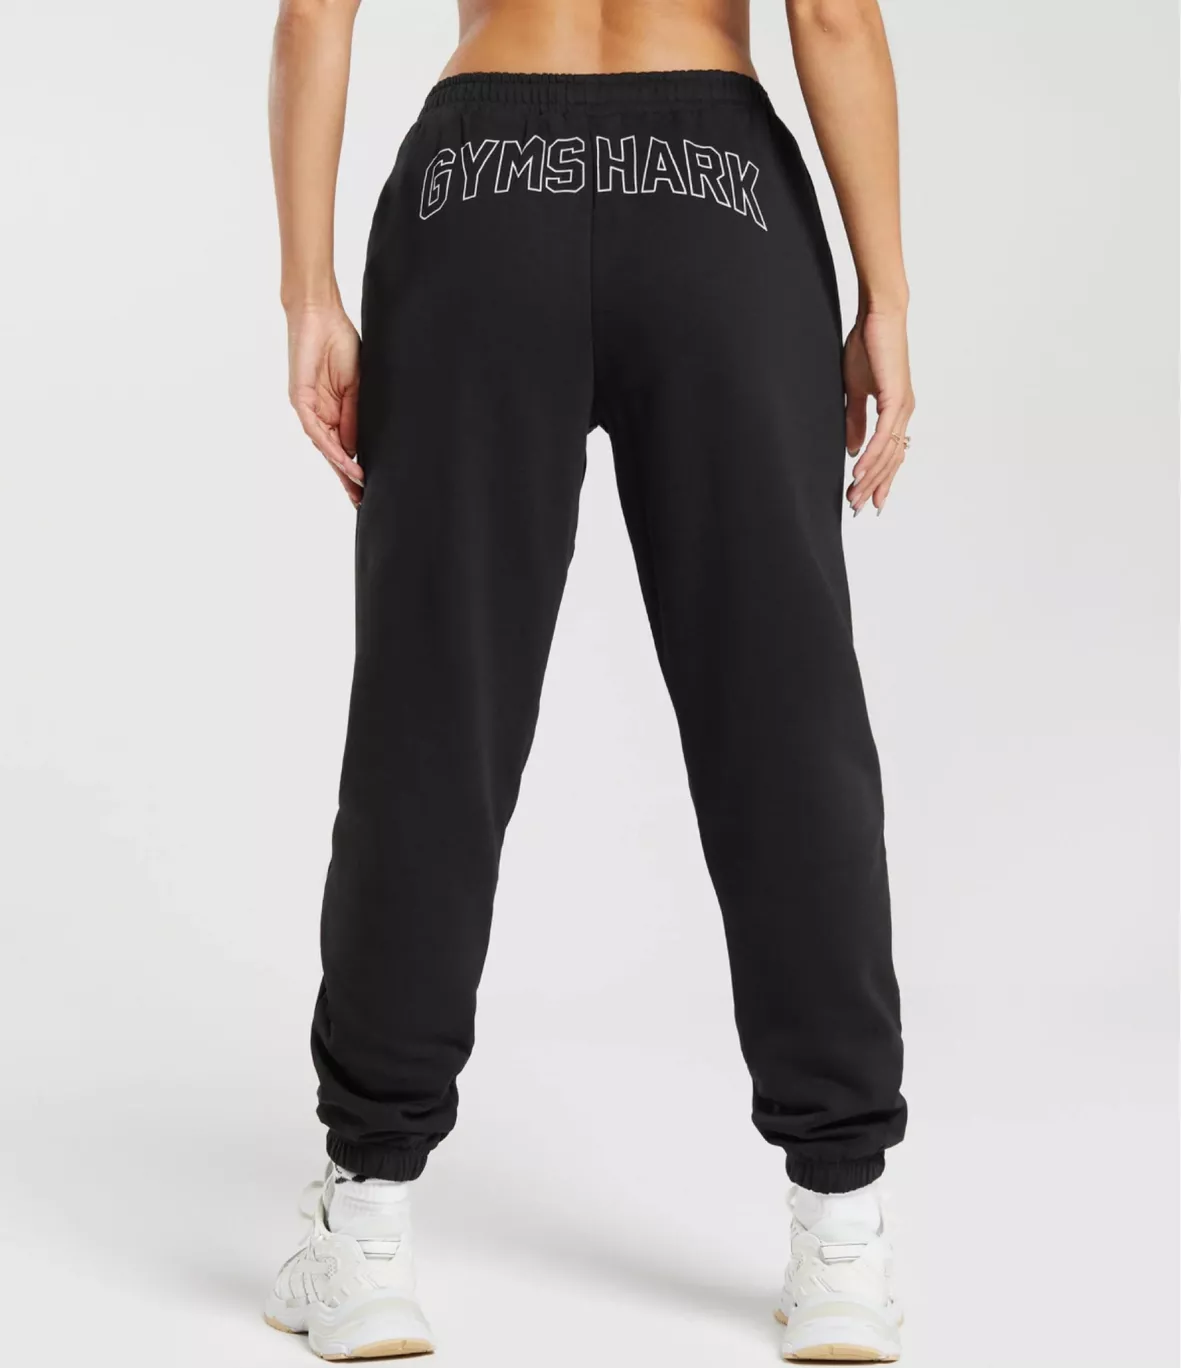 Gymshark Strength Department Graphic Joggers - Light Grey Core Marl